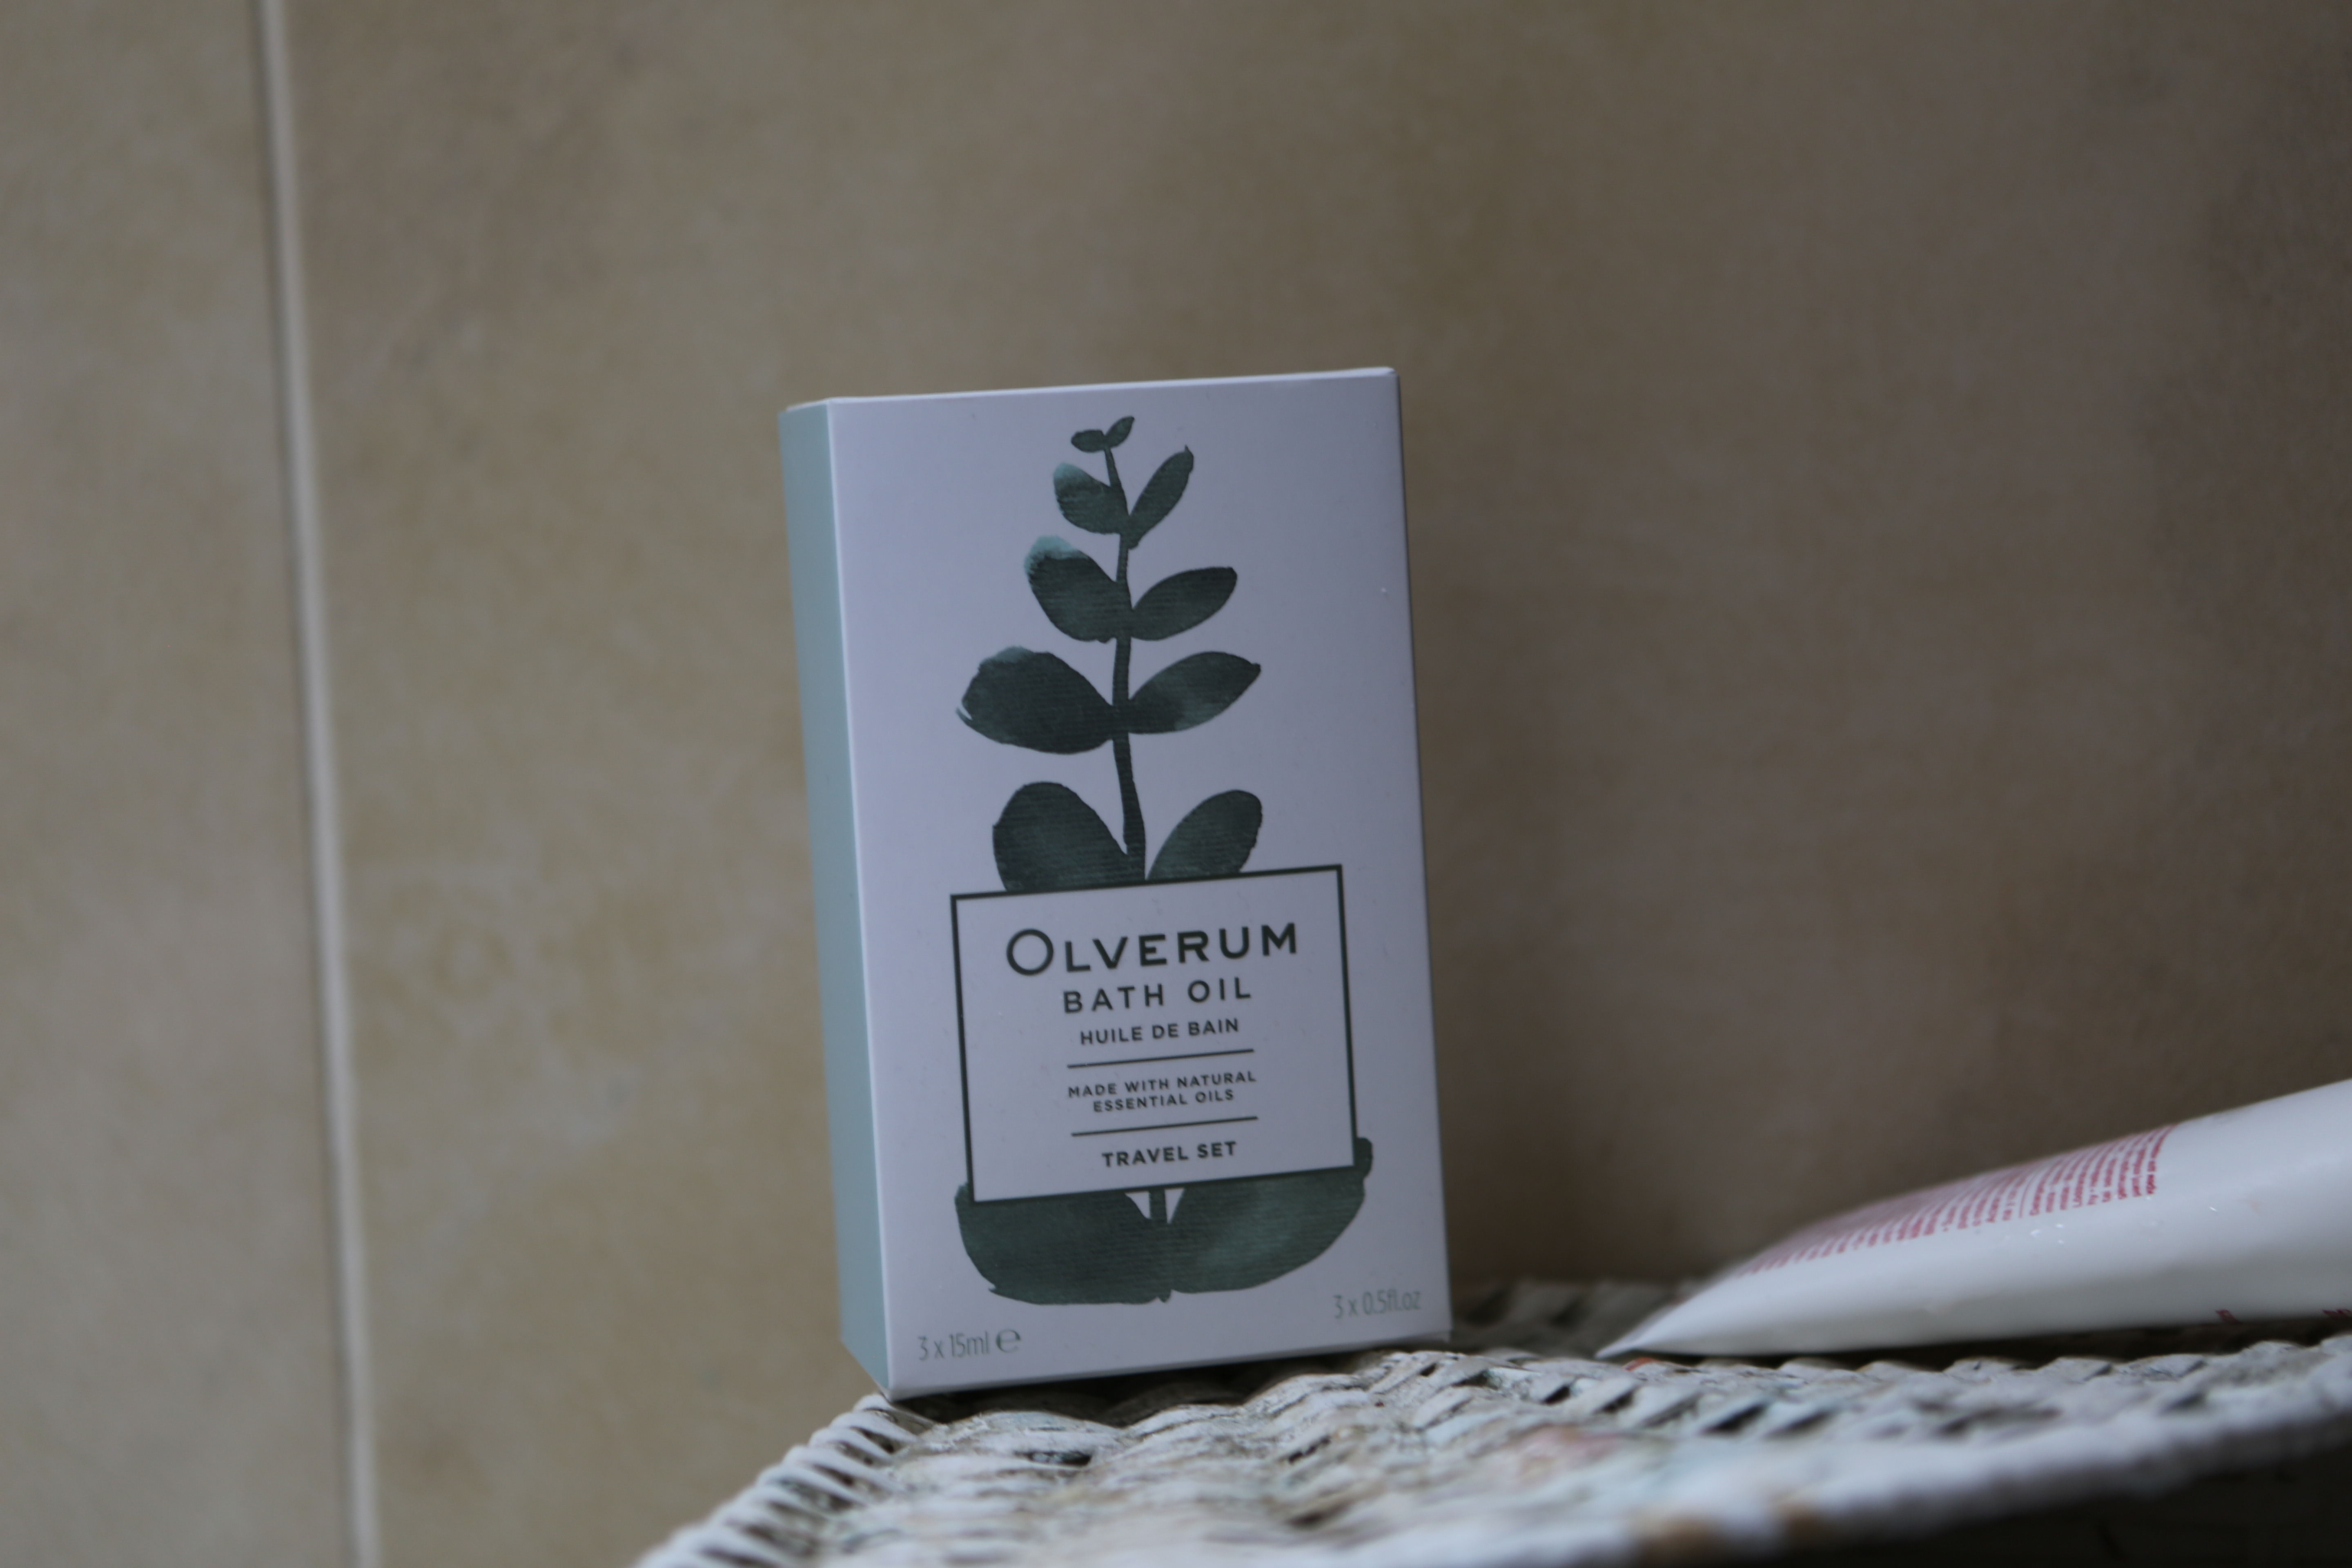 Relax with some Olverum bath Oils